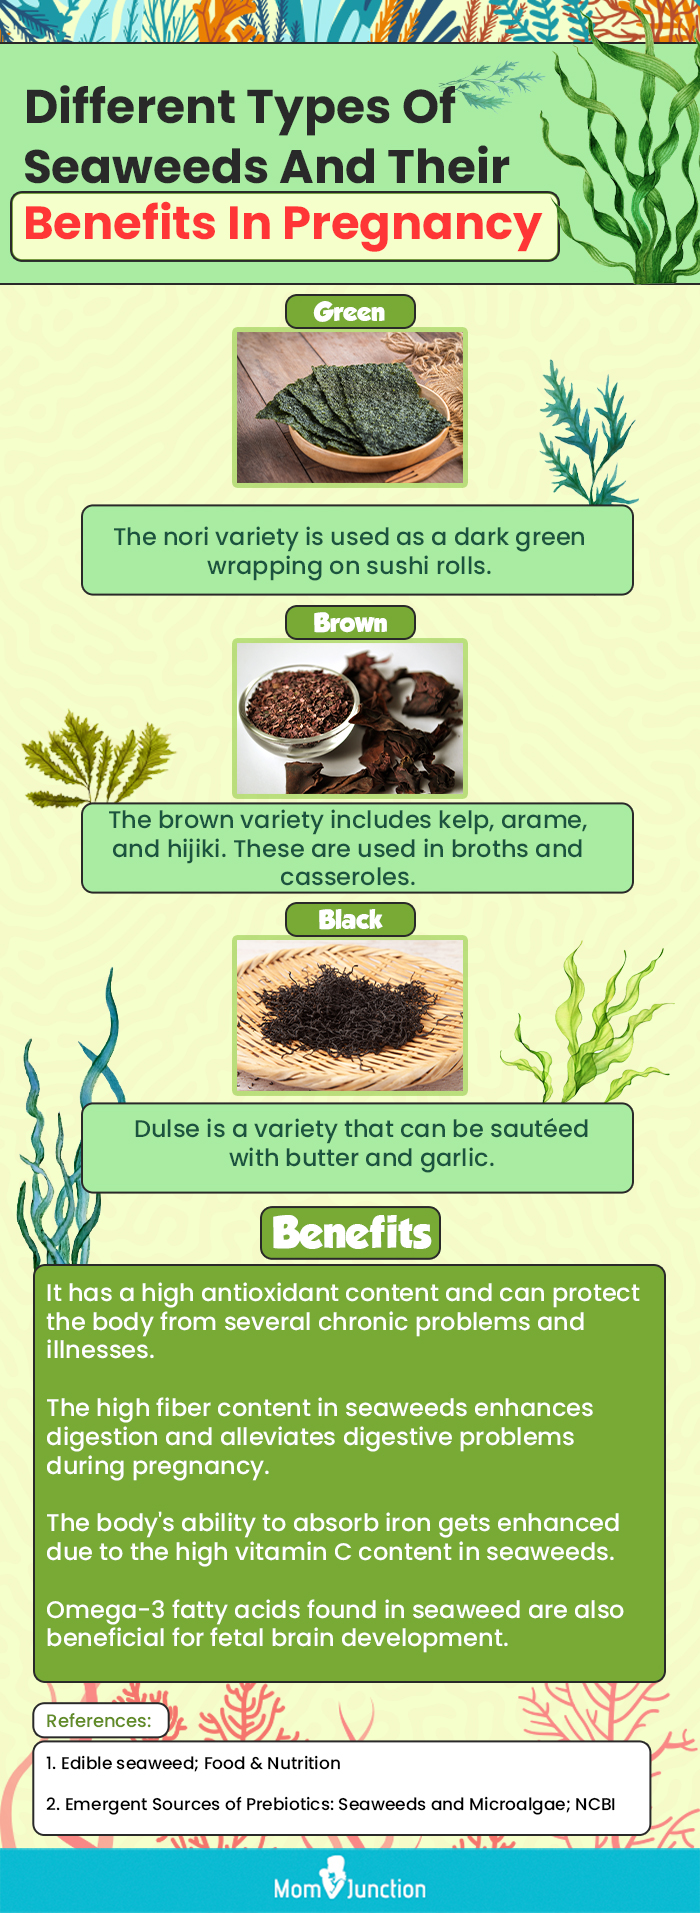 different types of seaweeds and their benefits in pregnancy (infographic)